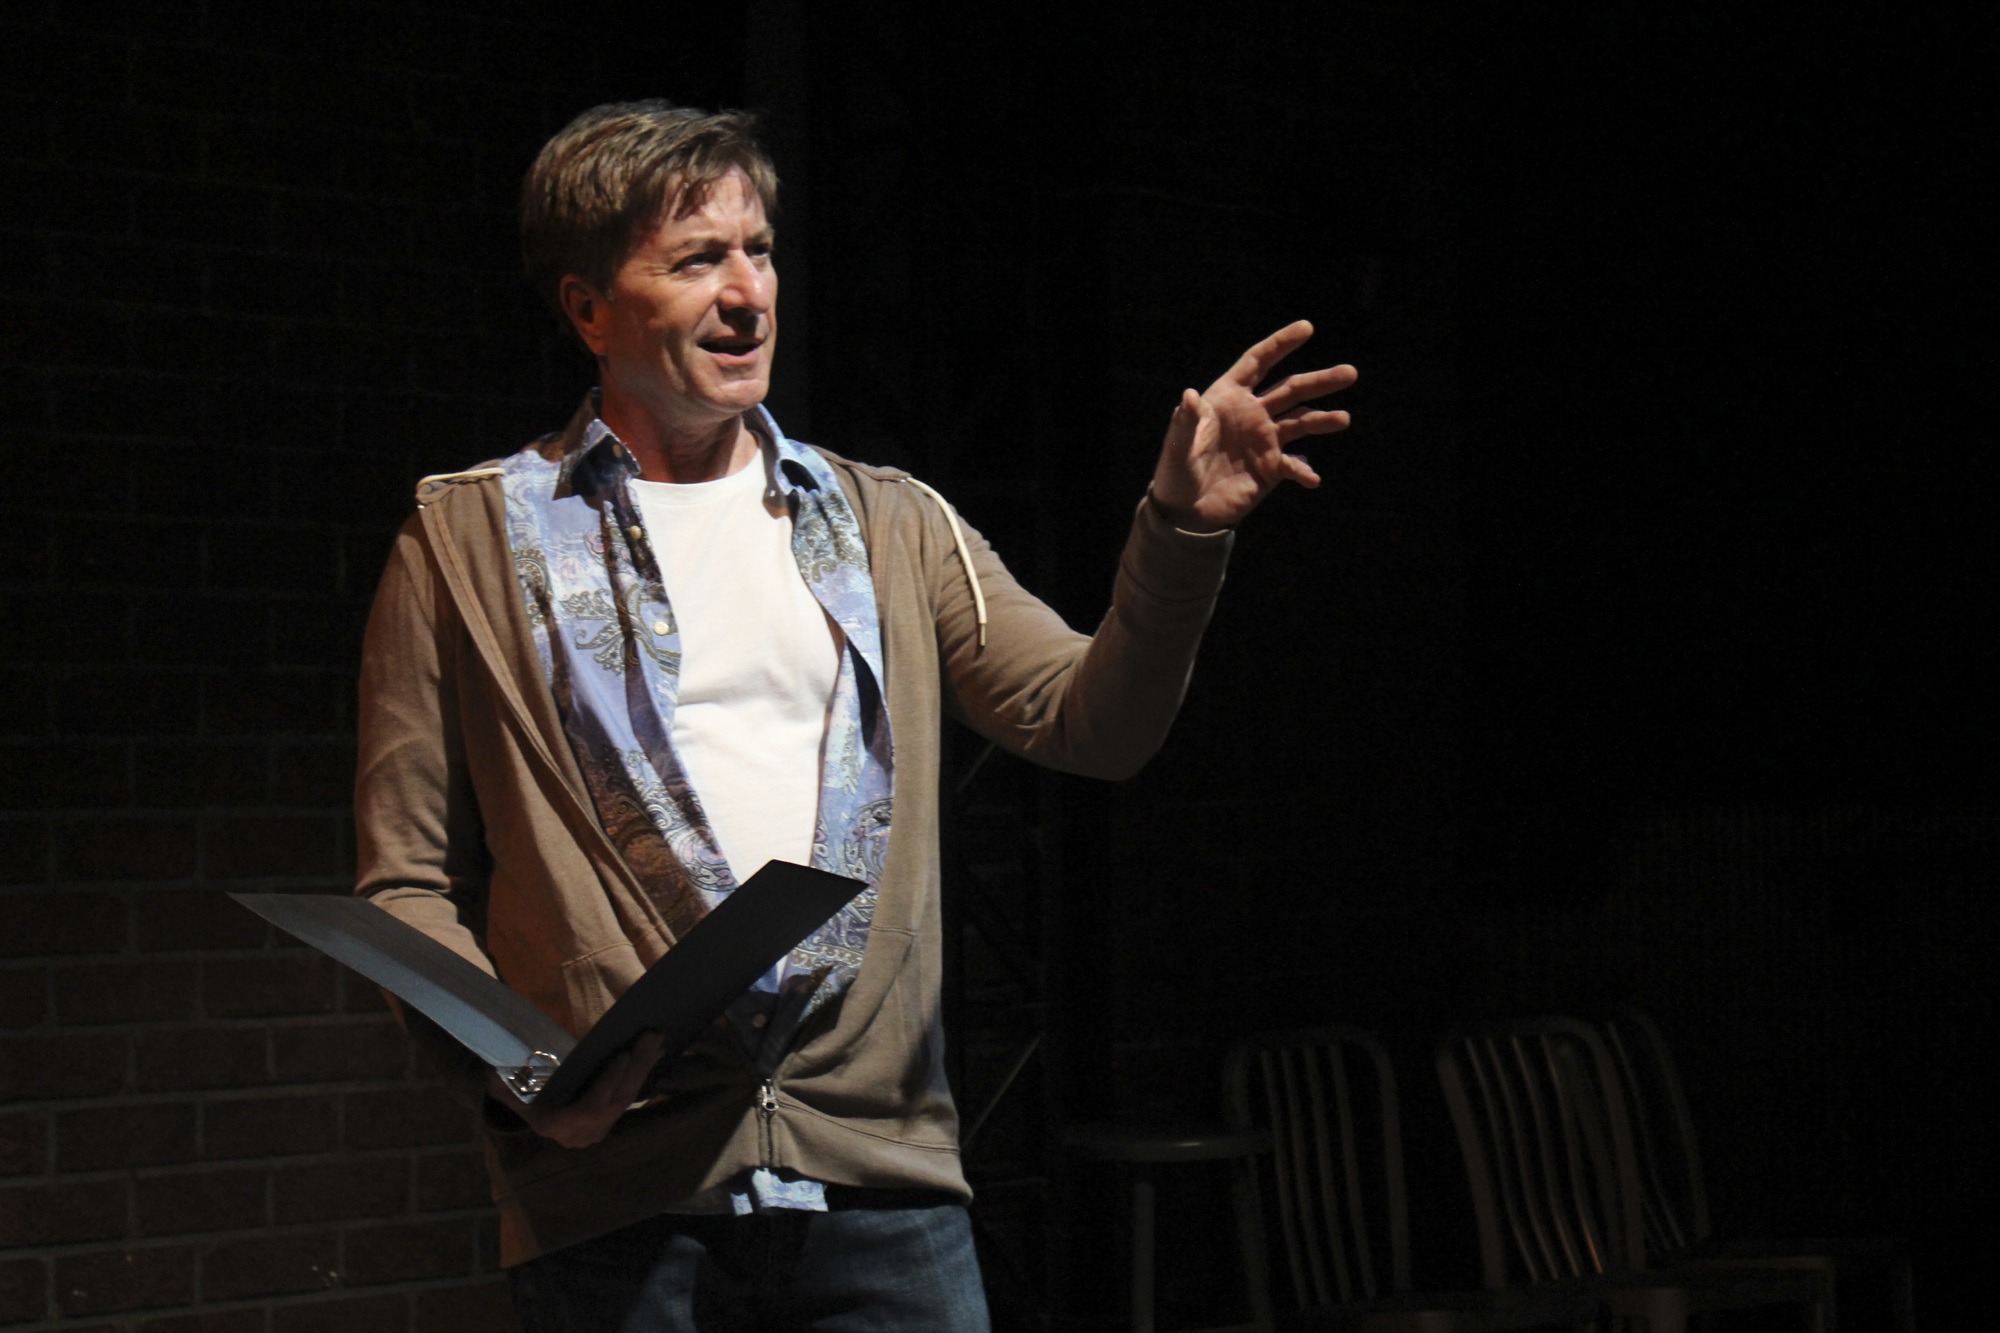 Jeffrey Plunkett and the rest of the cast produce a stripped-down reading, focusing on the stories over the  performance.